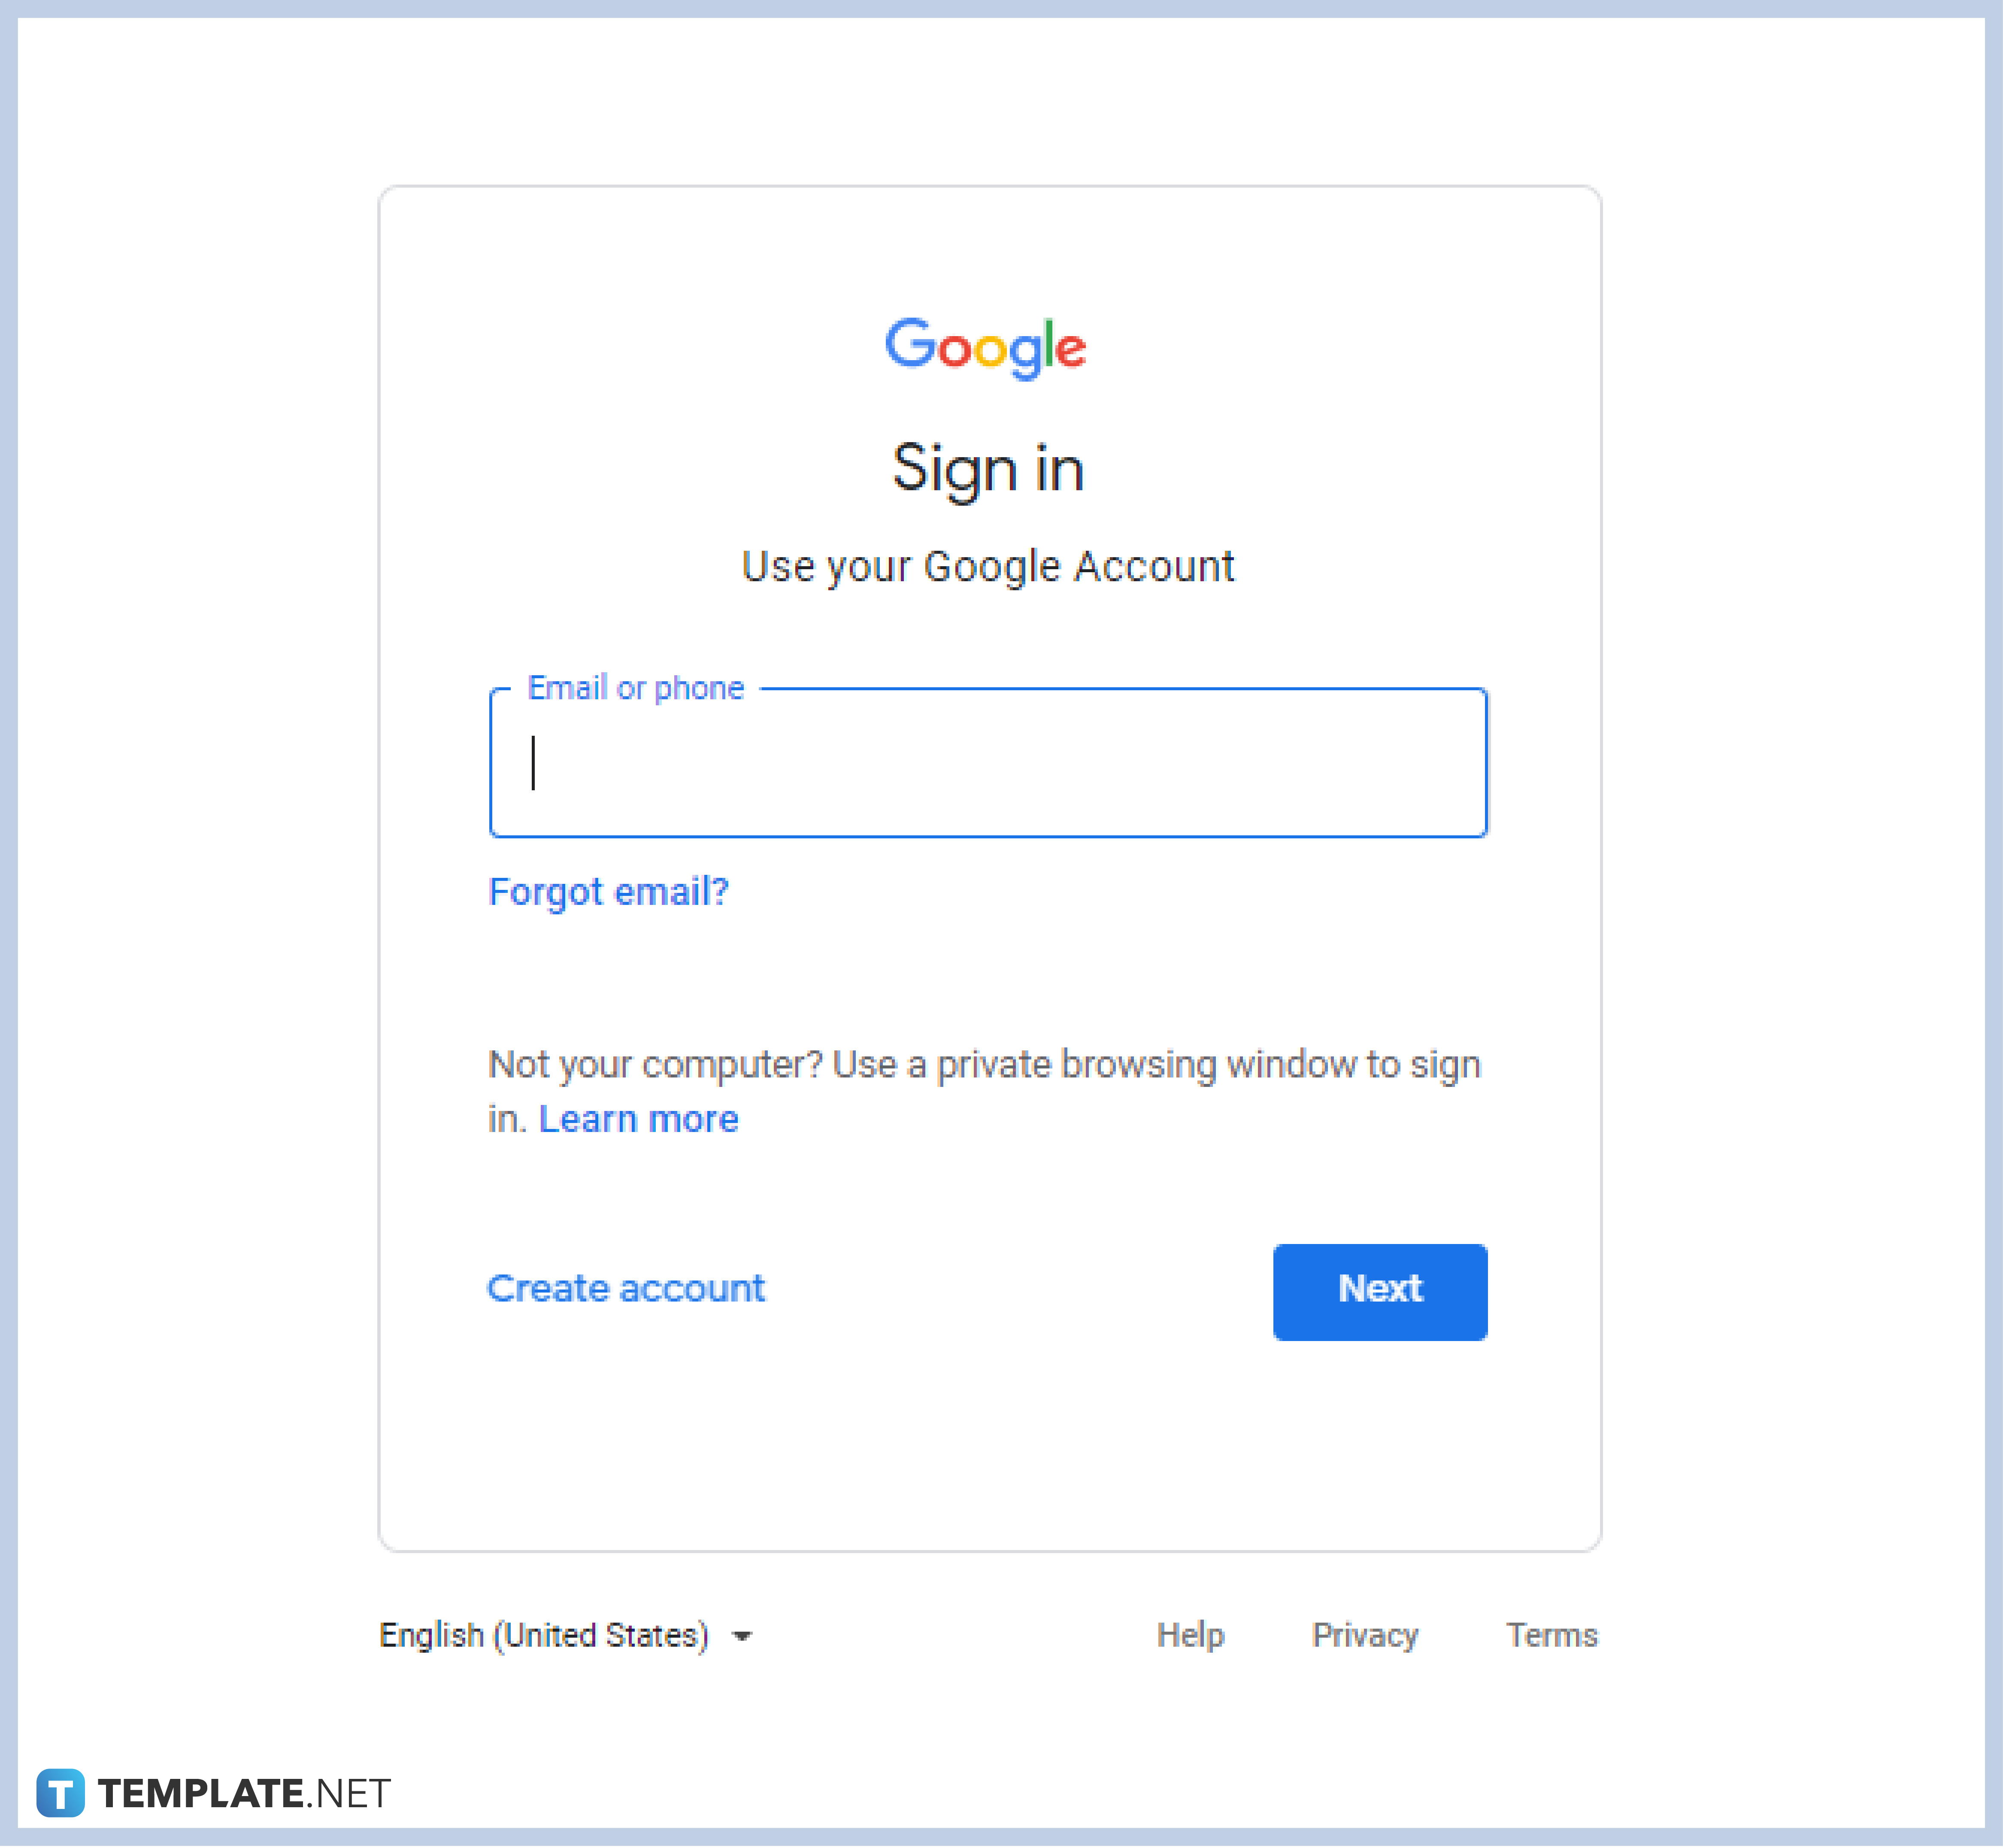 step-1-log-in-to-your-google-account-012